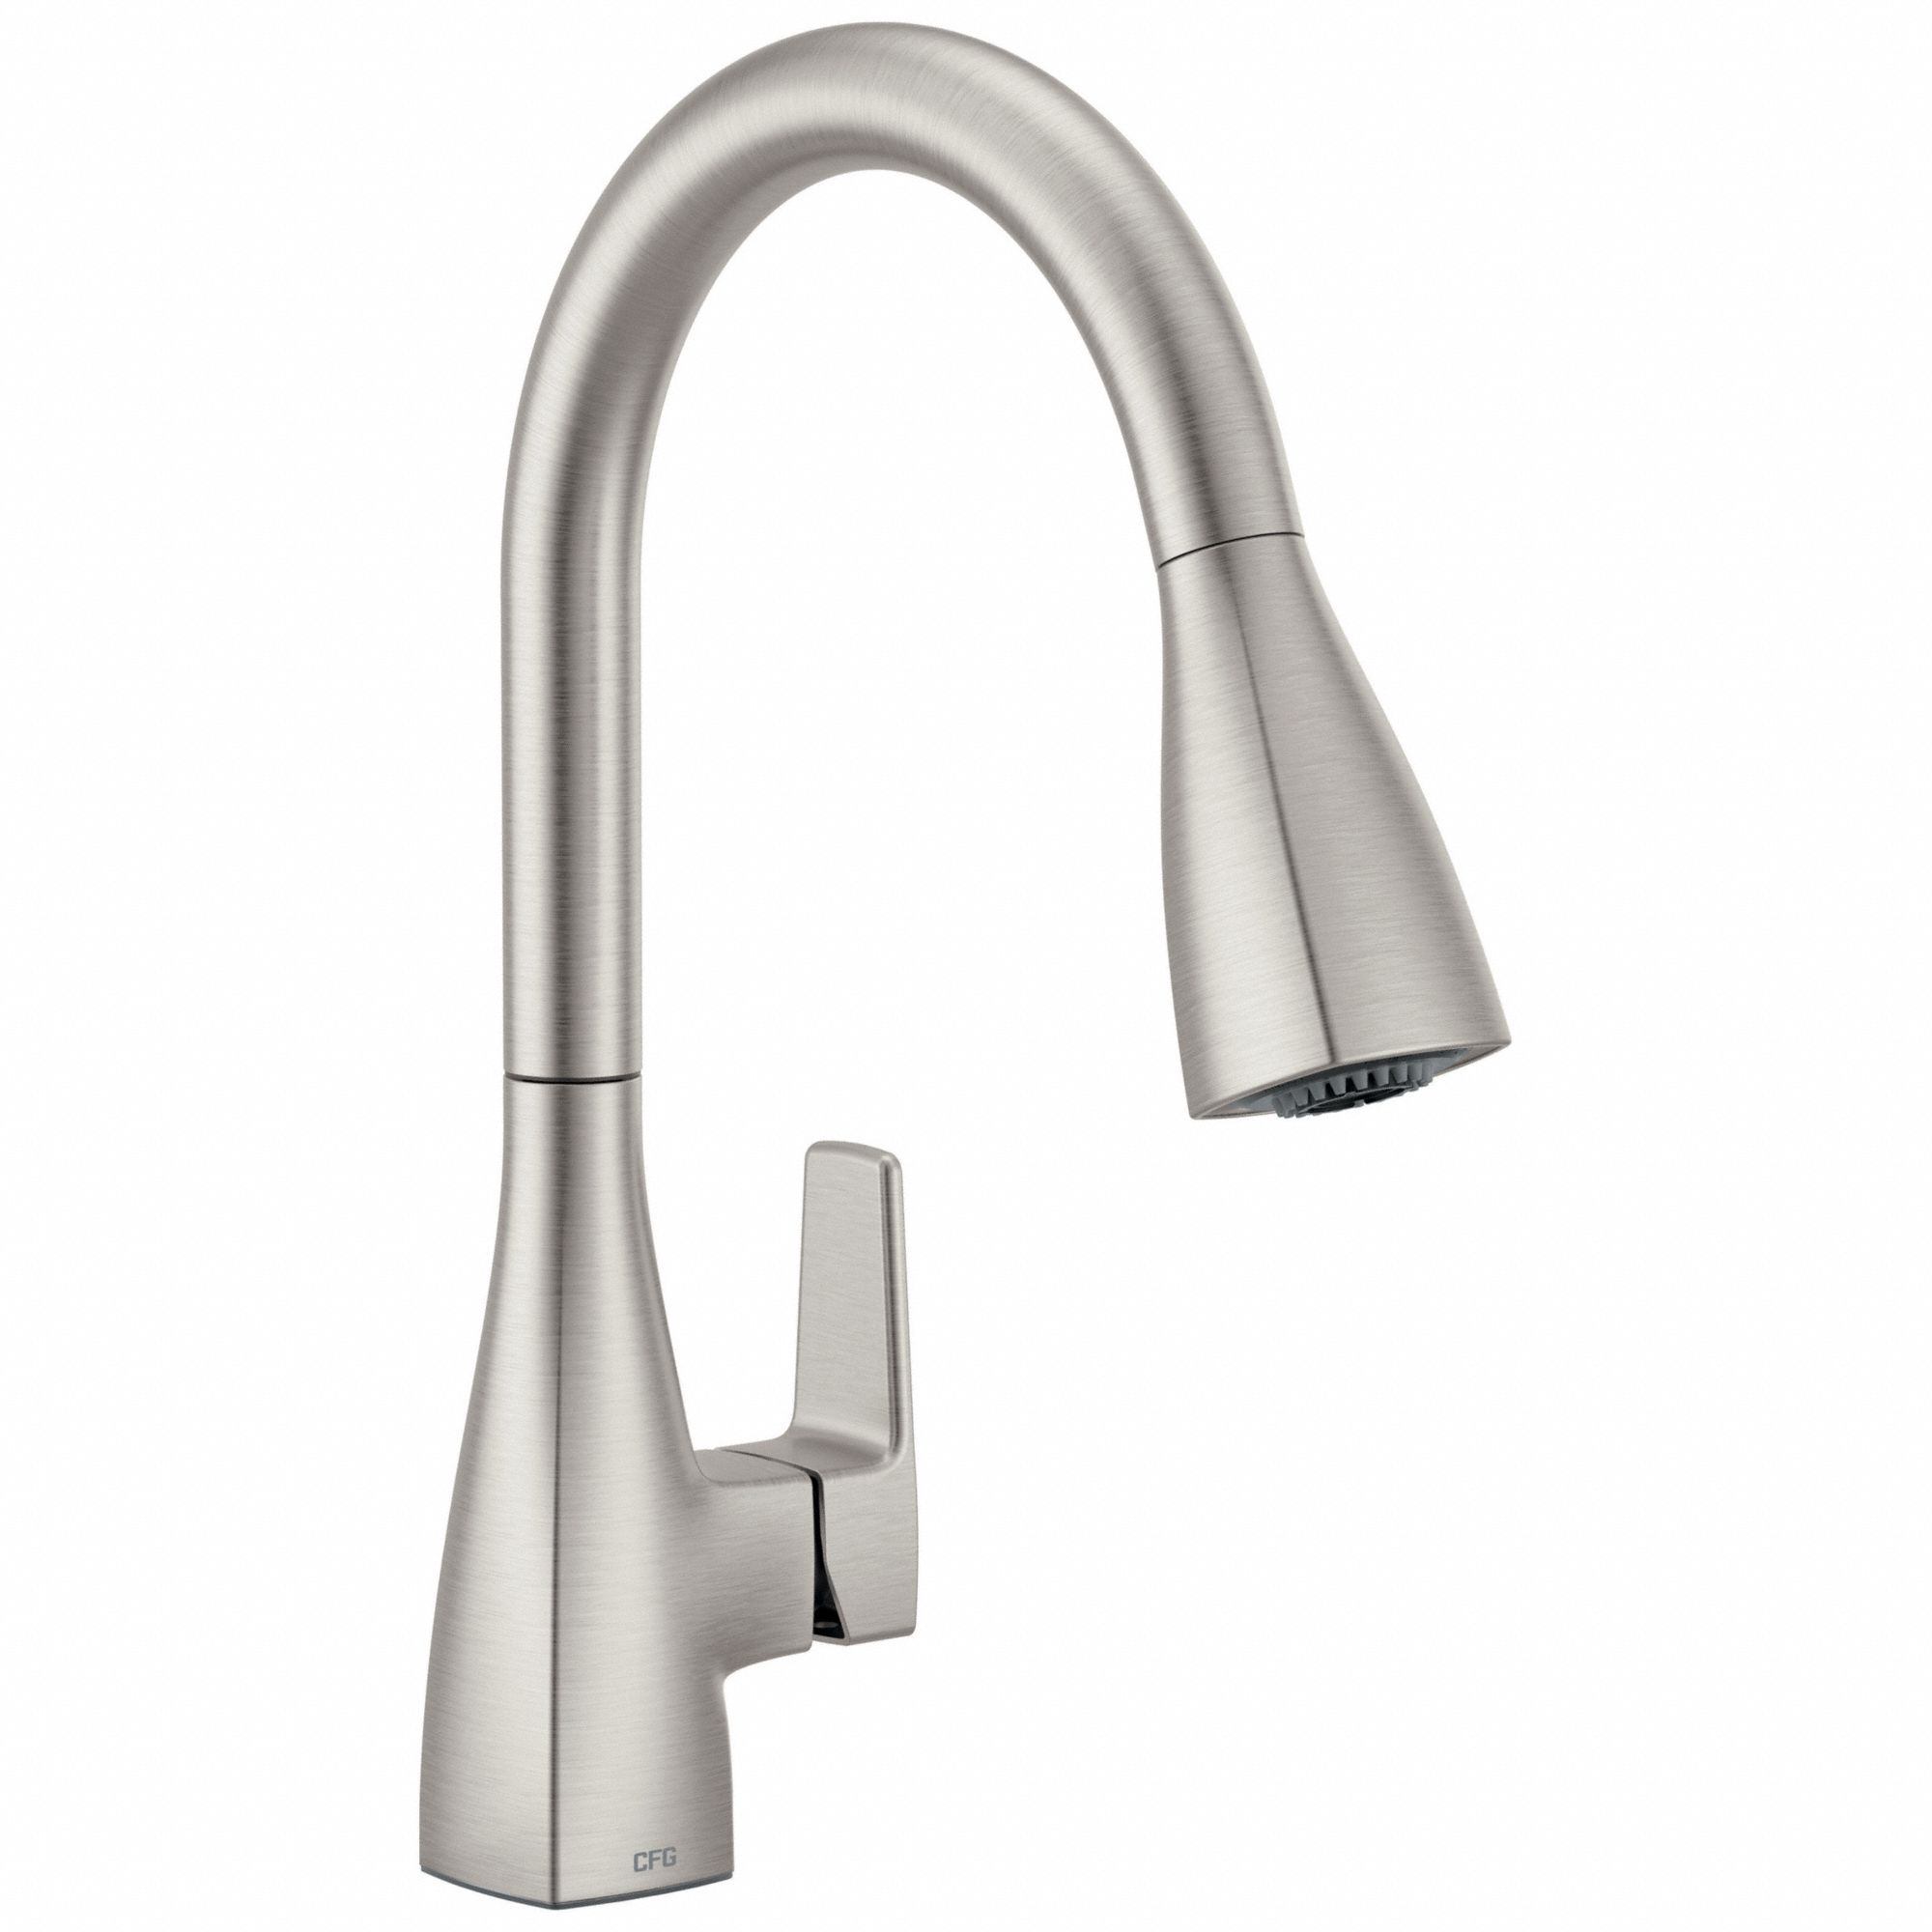 Kitchen Faucet: Slate™, 76162, Spot Resist Stainless Finish, 1.5 gpm Flow Rate